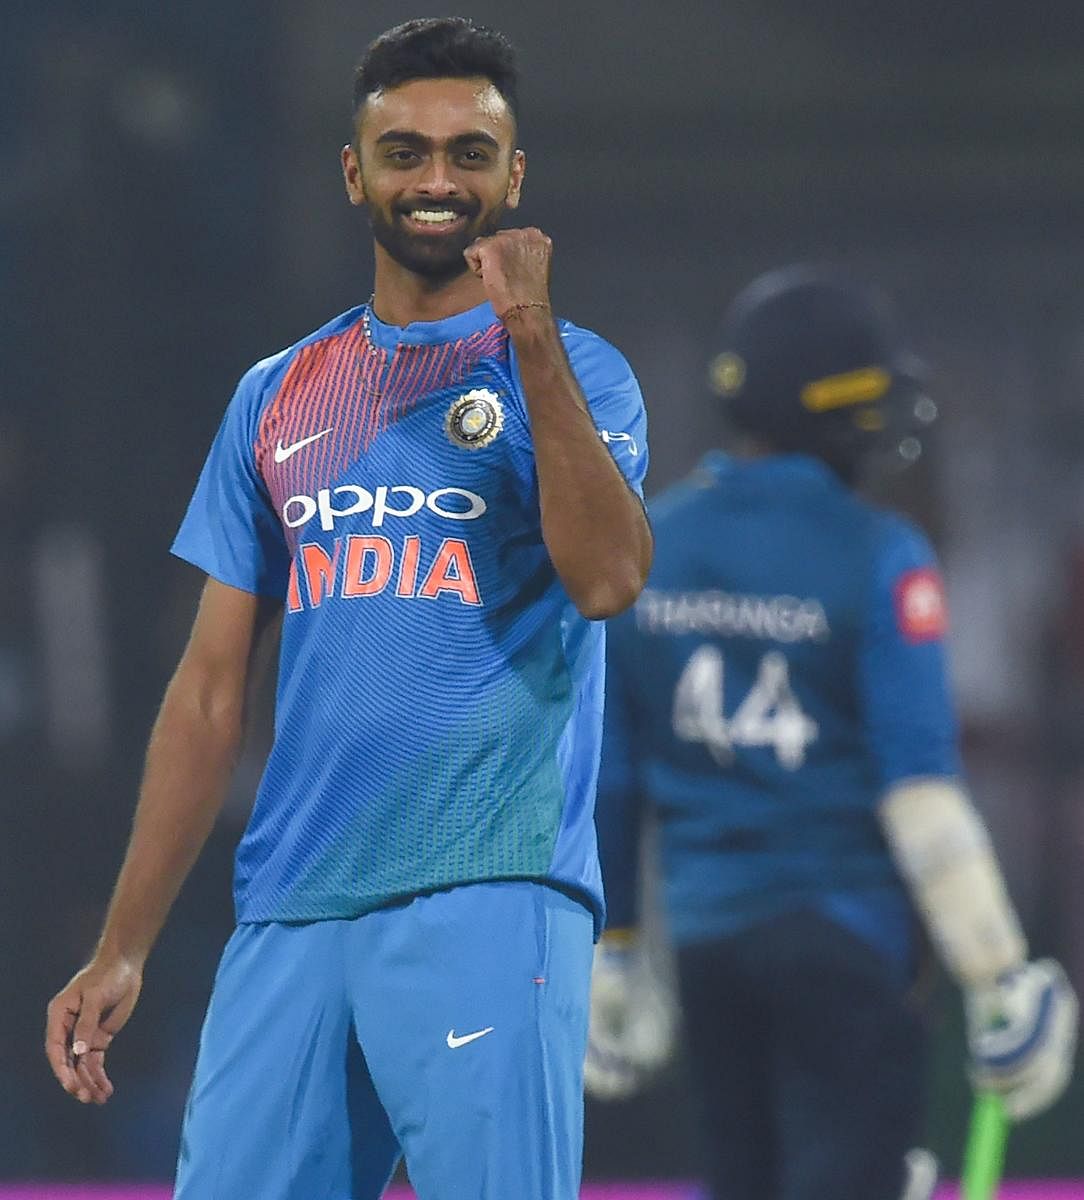 Indian cricketer Jaydev Unadkat celebrates after taking the wicket off Sri Lankan cricketer Niroshan Dickwella during the second T20 international cricket match between India and Sri Lanka at the Holkar Stadium in Indore on December 22, 2017. / AFP PHOTO / INDRANIL MUKHERJEE / ----IMAGE RESTRICTED TO EDITORIAL USE - STRICTLY NO COMMERCIAL USE----- / GETTYOUT